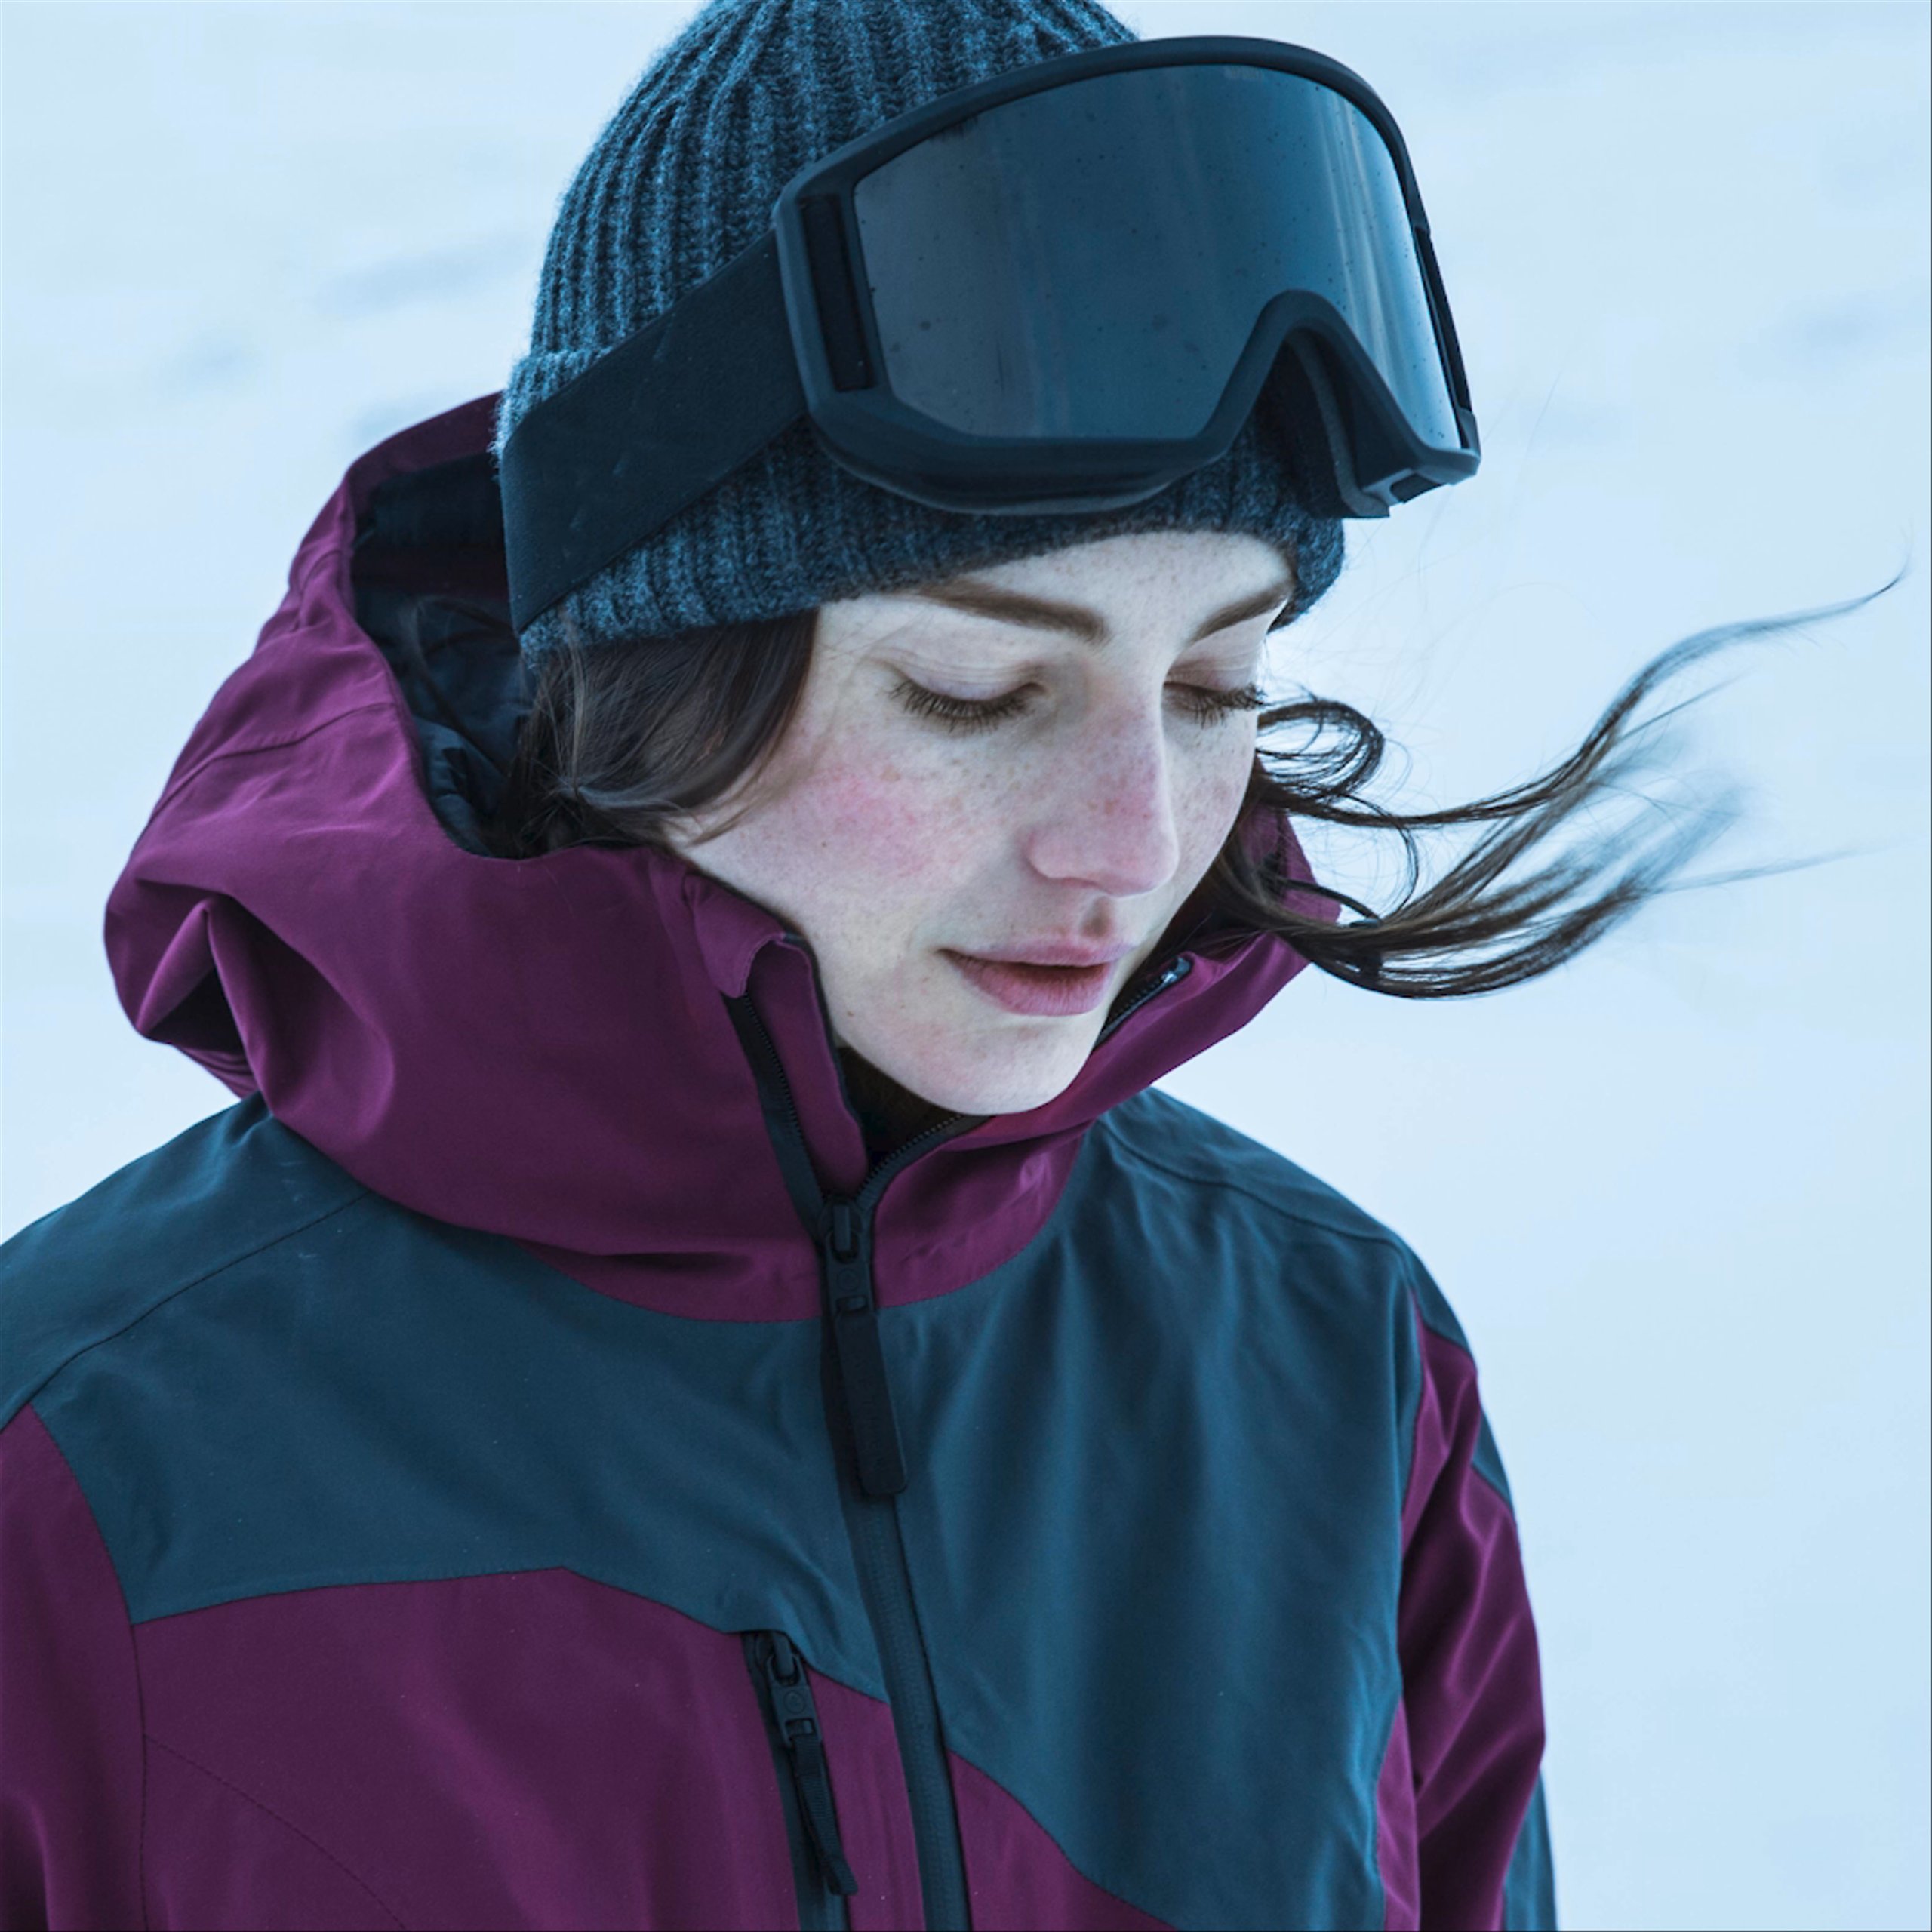 Slideshow of woman wearing Aether gear in various cold-weather locations